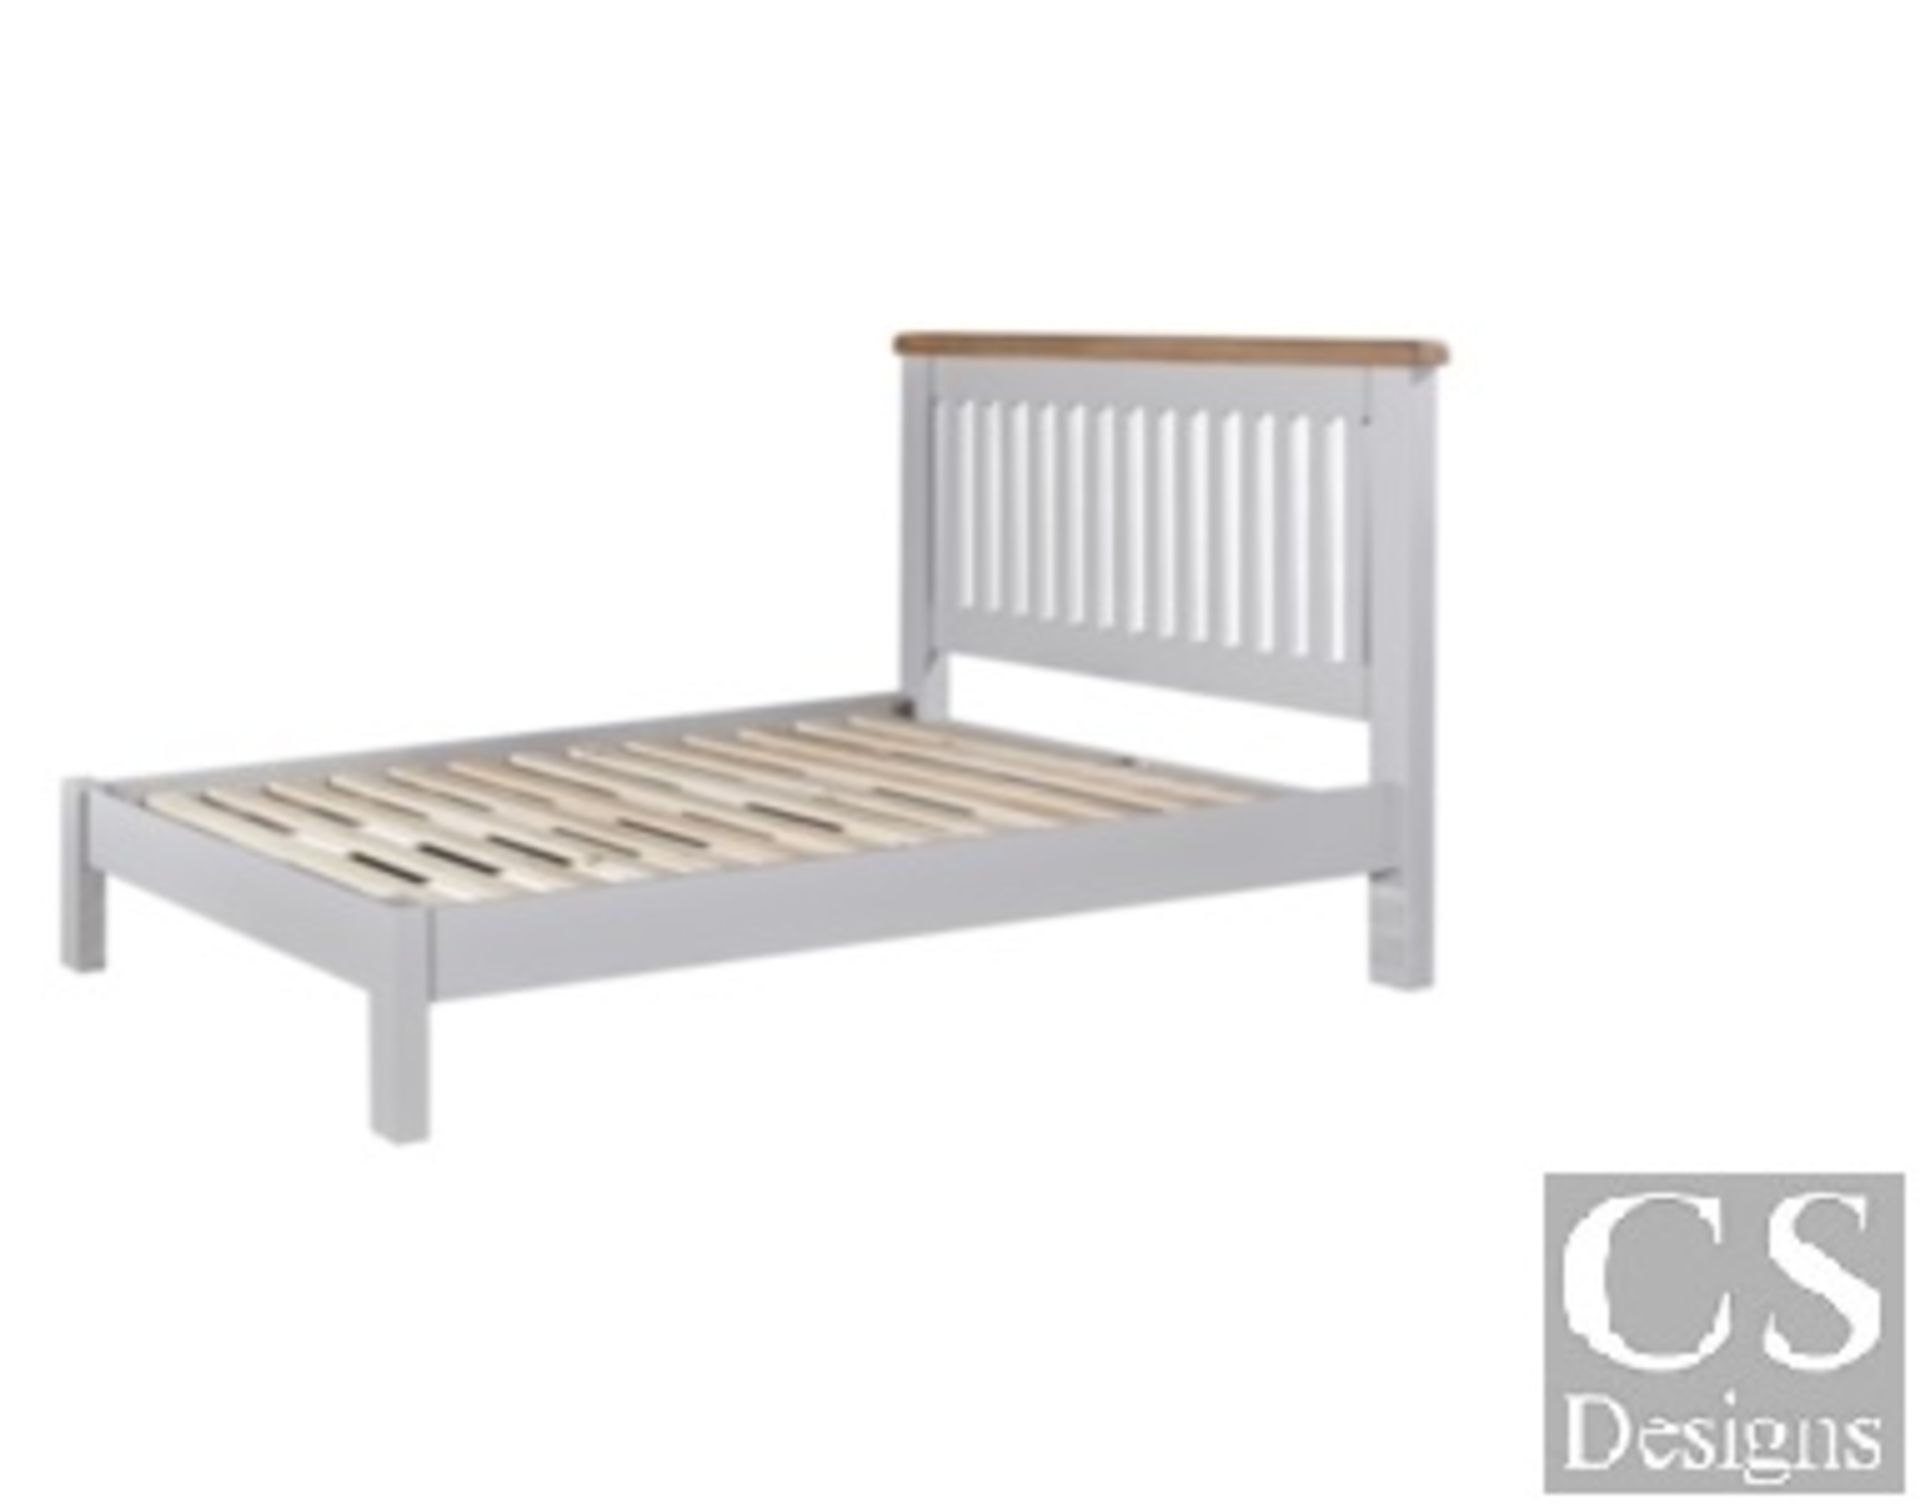 + VAT Brand New CS Designs "Daylesford" Double Bed Frame With Natural Oak Tops And Solid Hardwood - Image 3 of 3